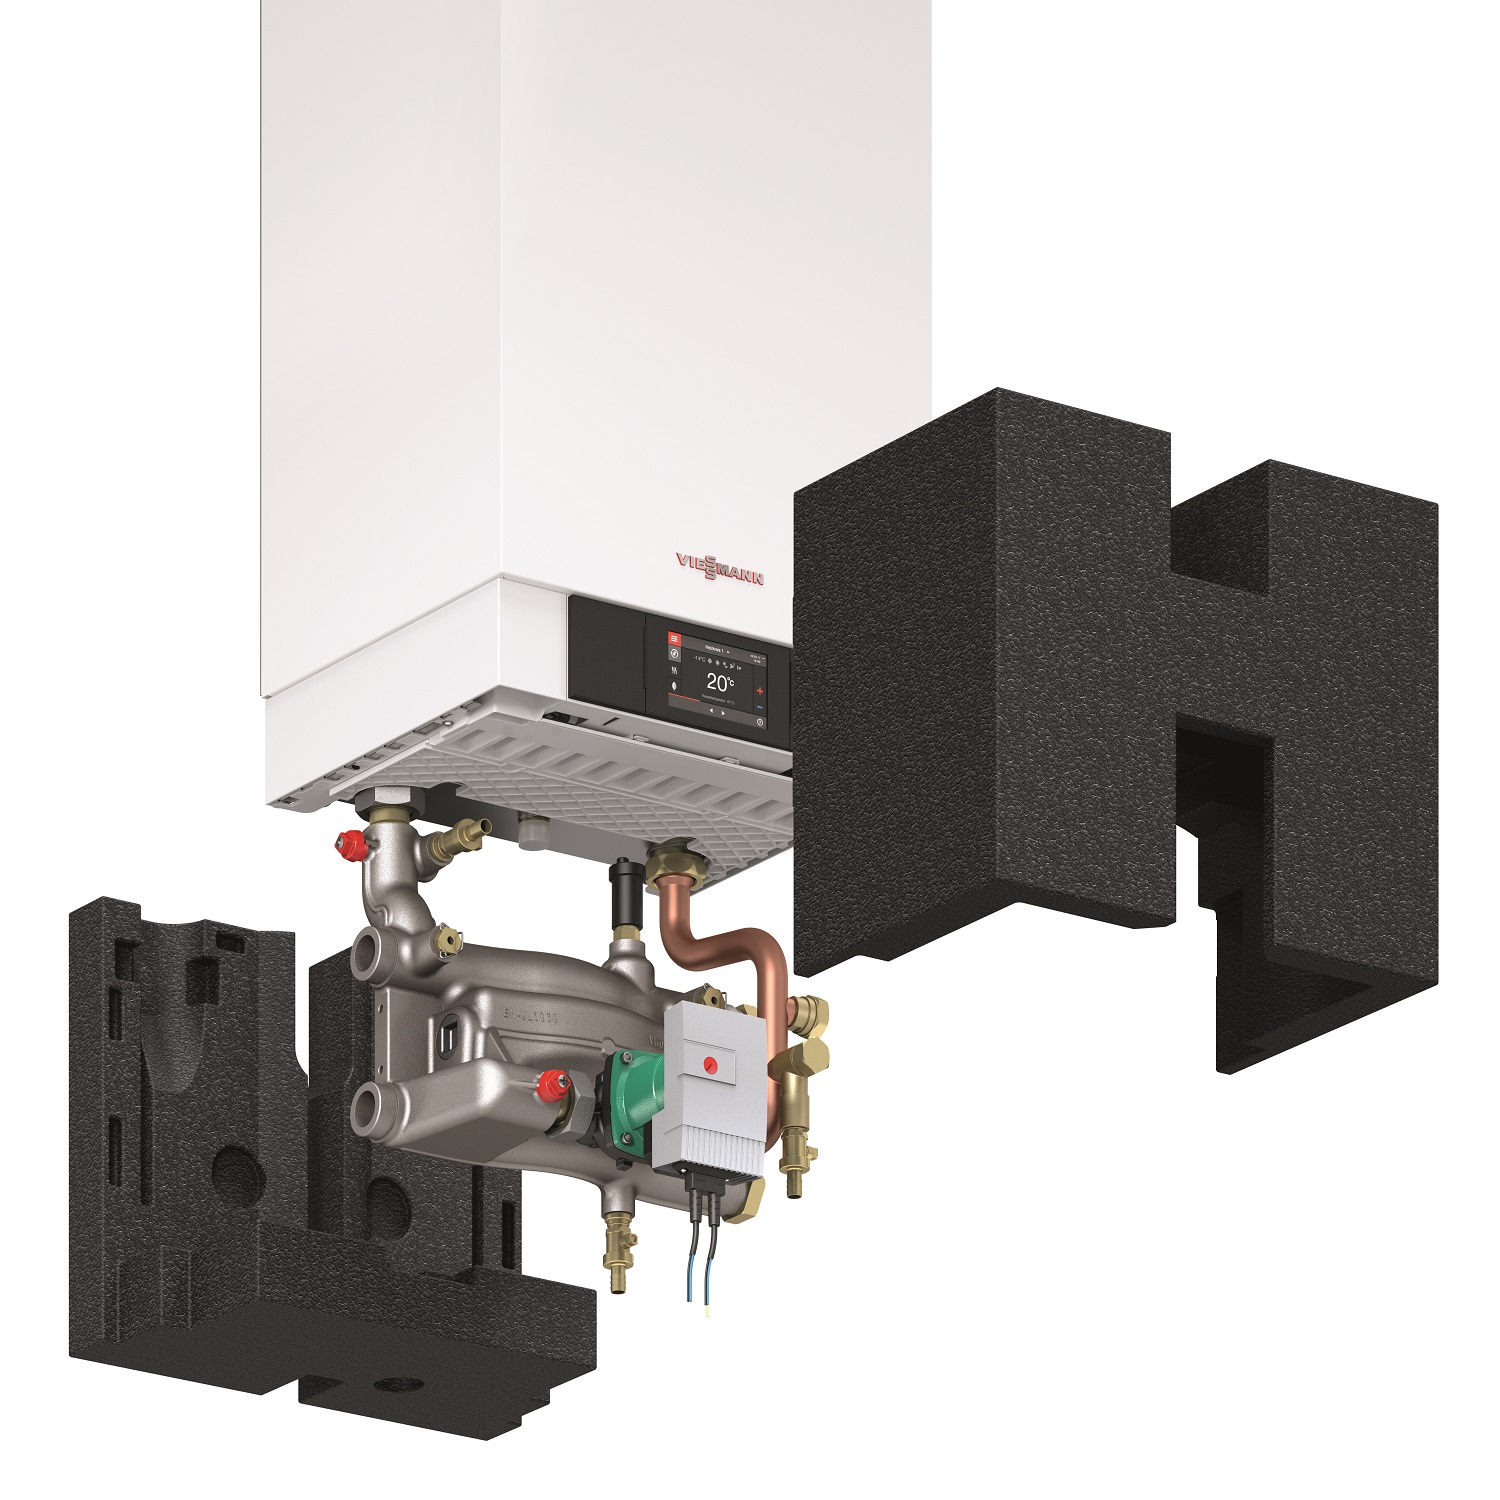 Viessmann boiler pump connection set with built-in low loss header.